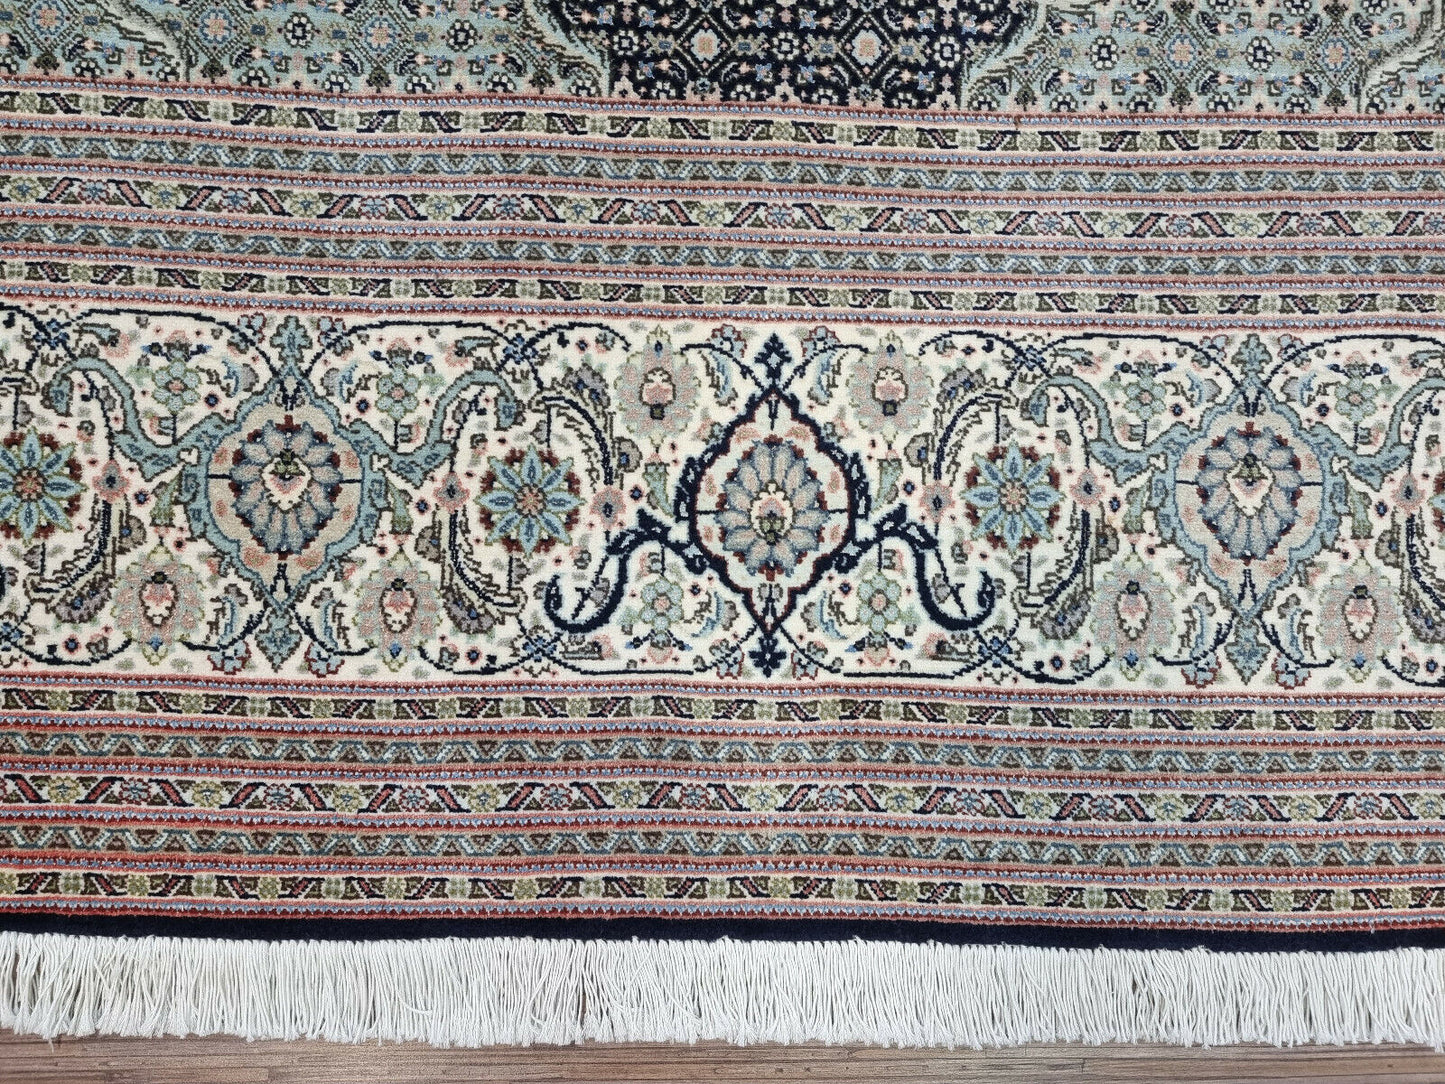 Close-up of the central medallion and detailed patterns on the Tabriz 50 Raj rug